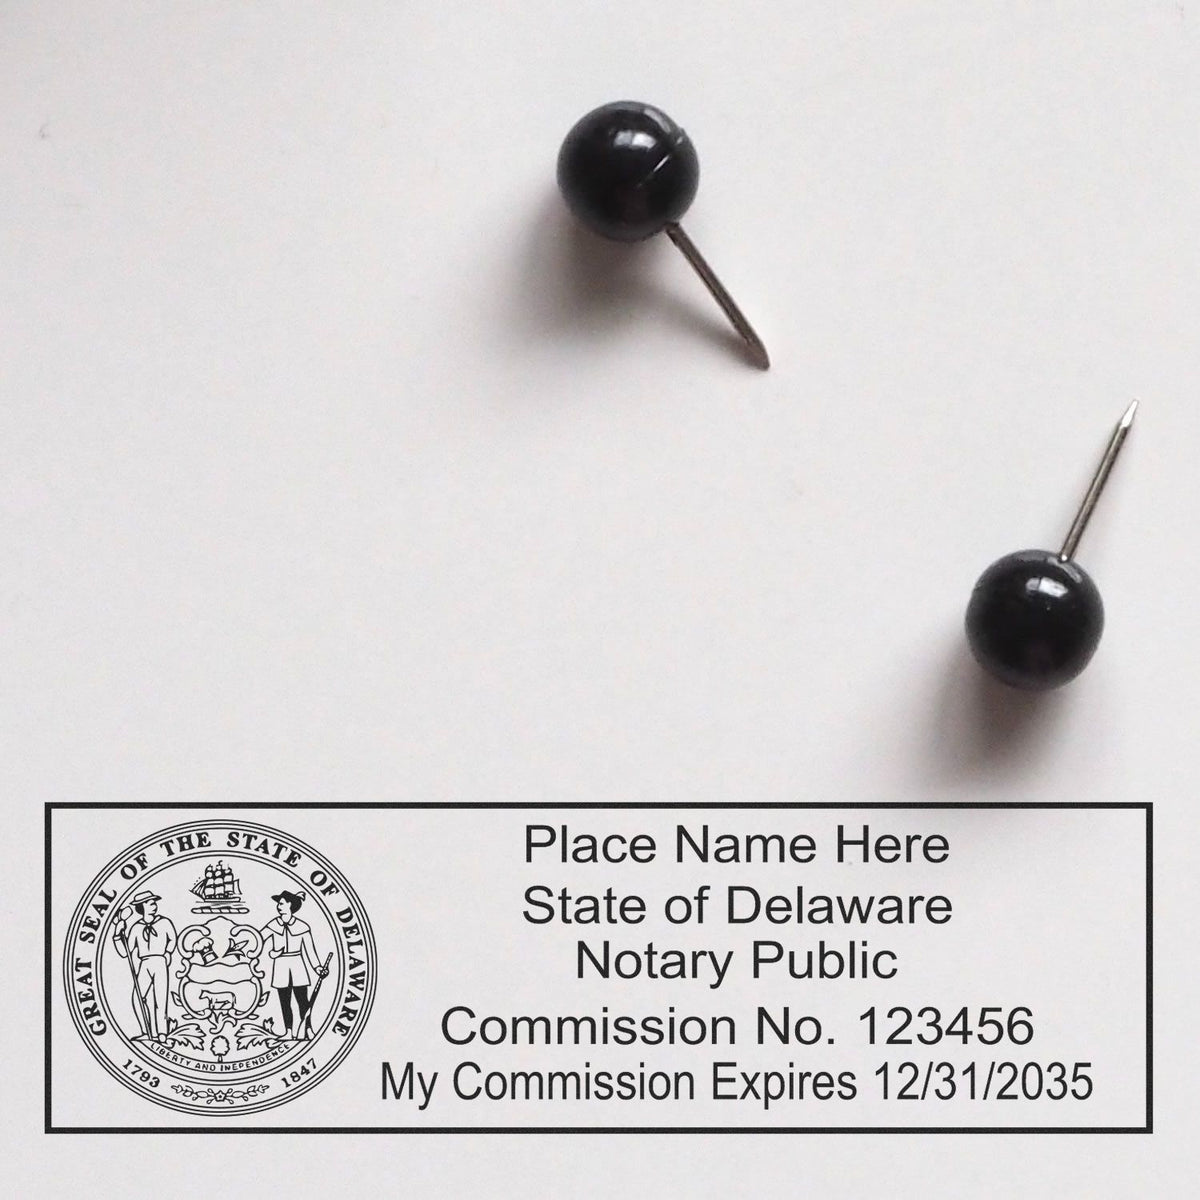 A photograph of the Wooden Handle Delaware State Seal Notary Public Stamp stamp impression reveals a vivid, professional image of the on paper.